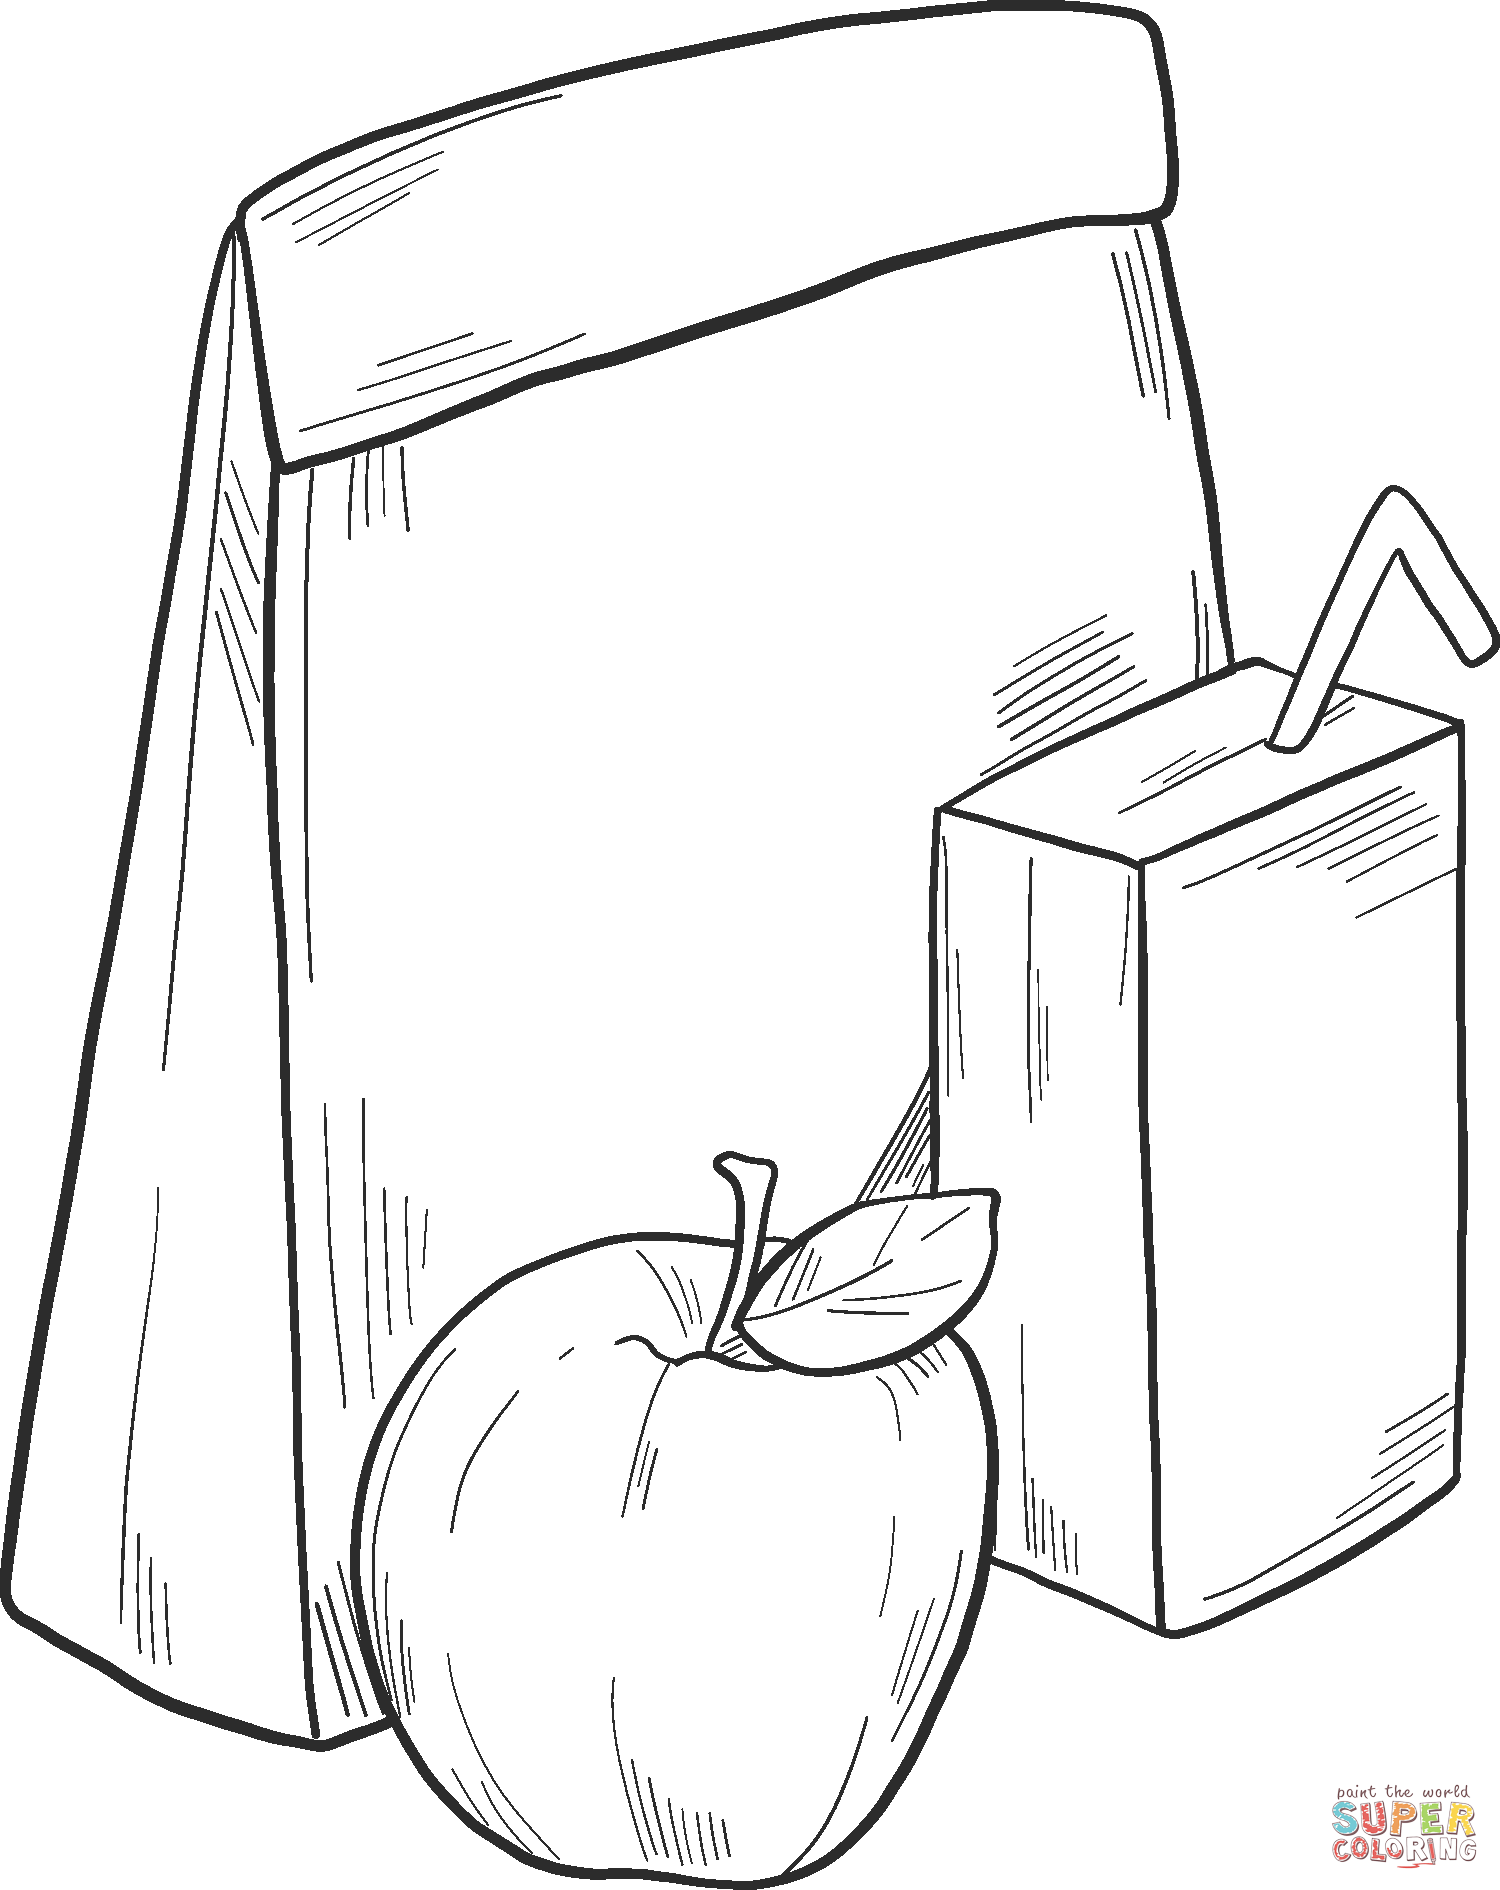 Lunch Bag coloring page | Free Printable Coloring Pages